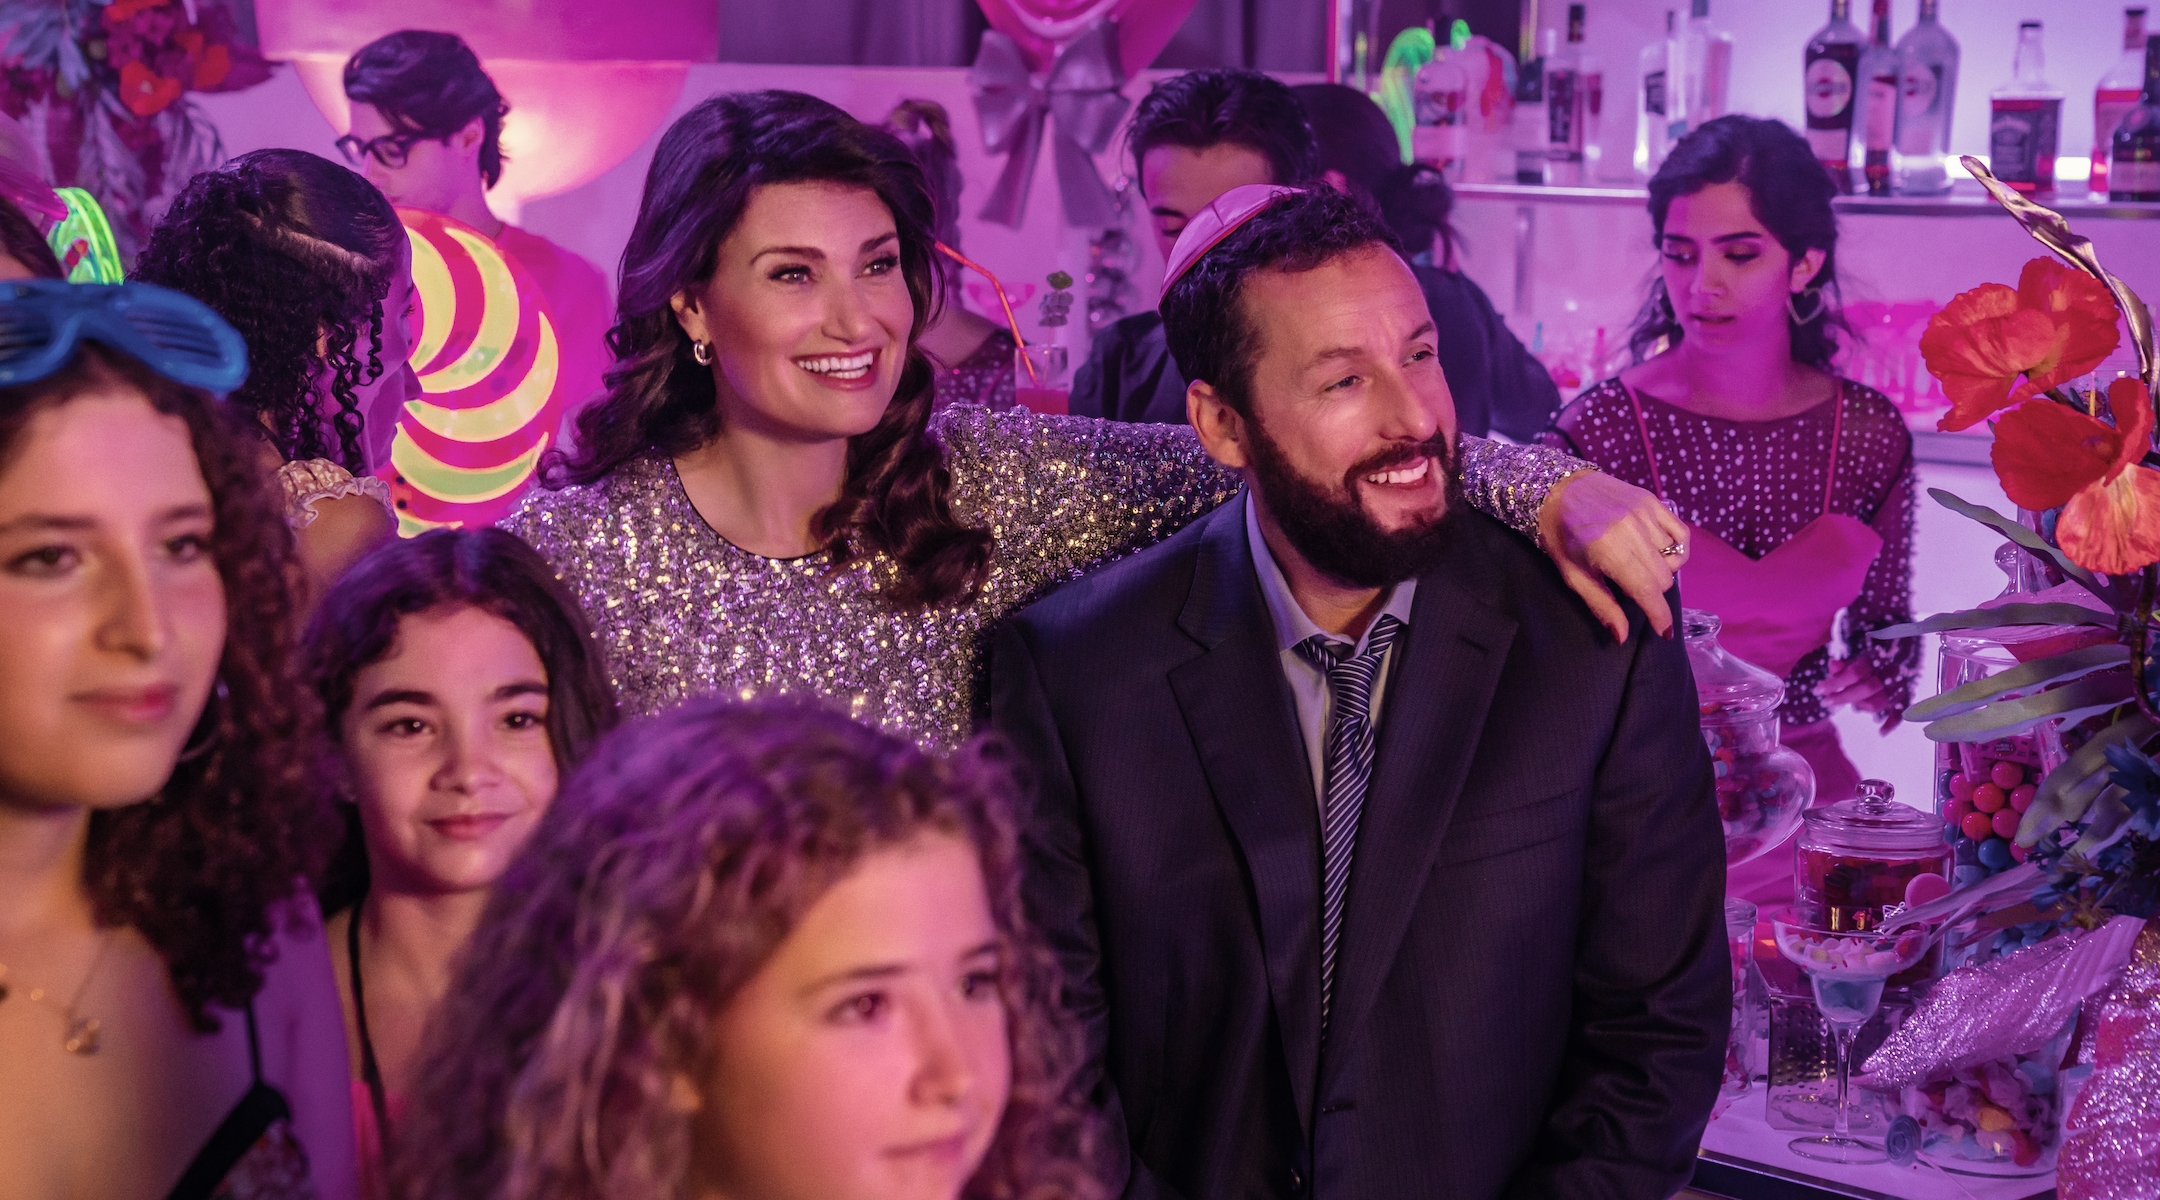 Idina Menzel, Adam Sandler’s co-star in “Uncut Gems,” reunites with him for “You Are So Not Invited To My Bat Mitzvah.” (Scott Yamano/Netflix)